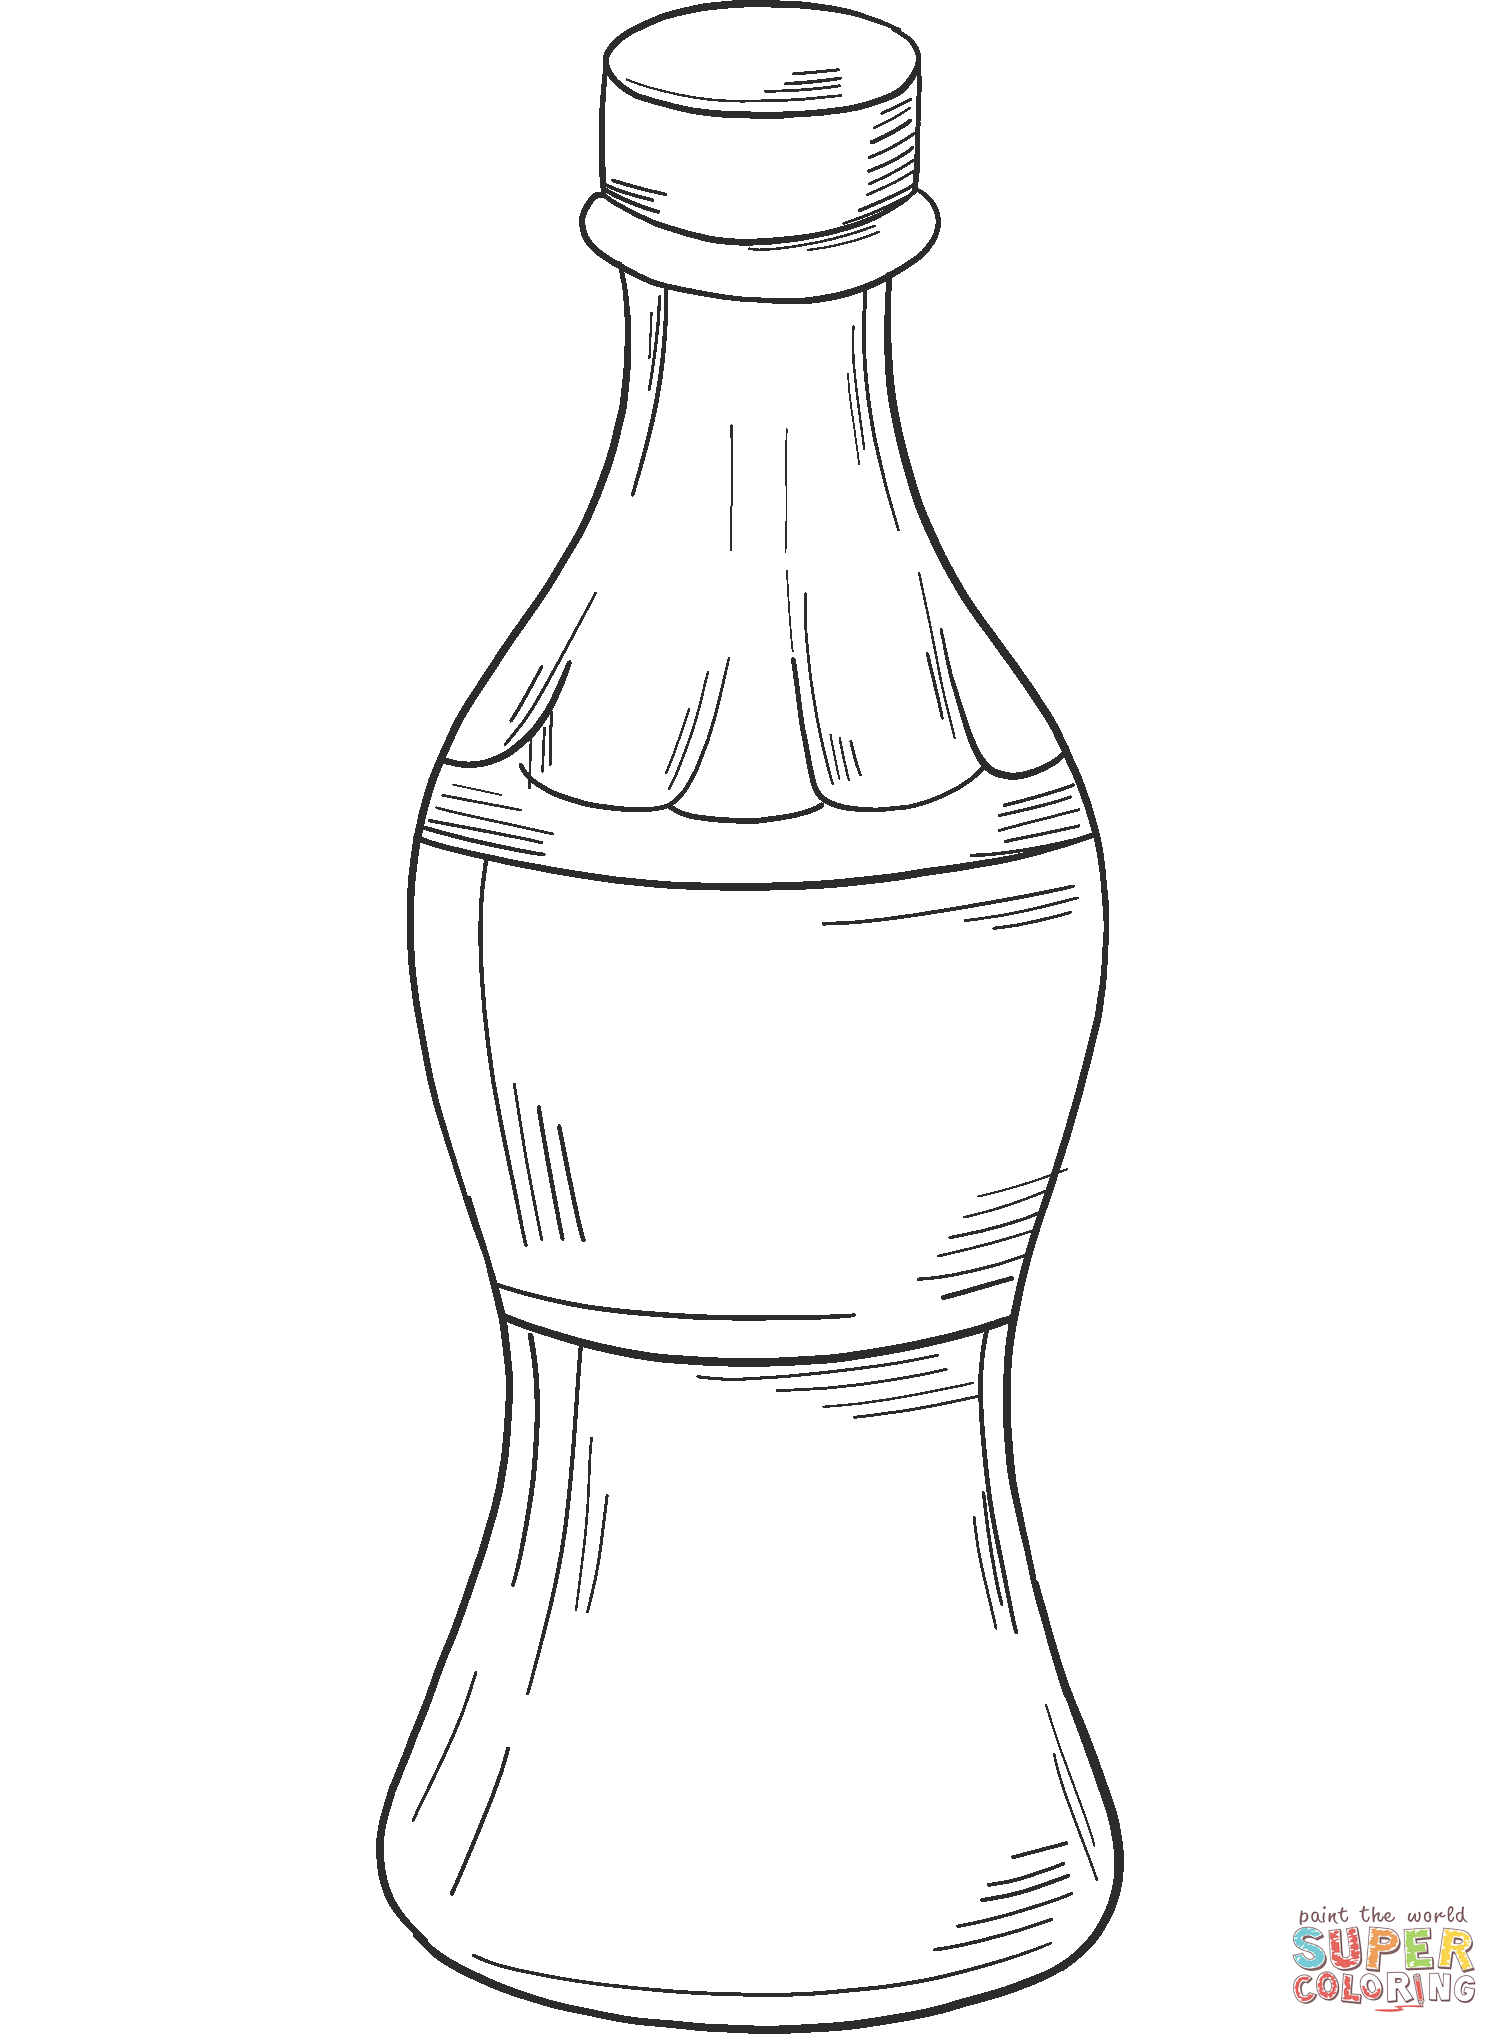 Soda bottle coloring page free printable coloring pages